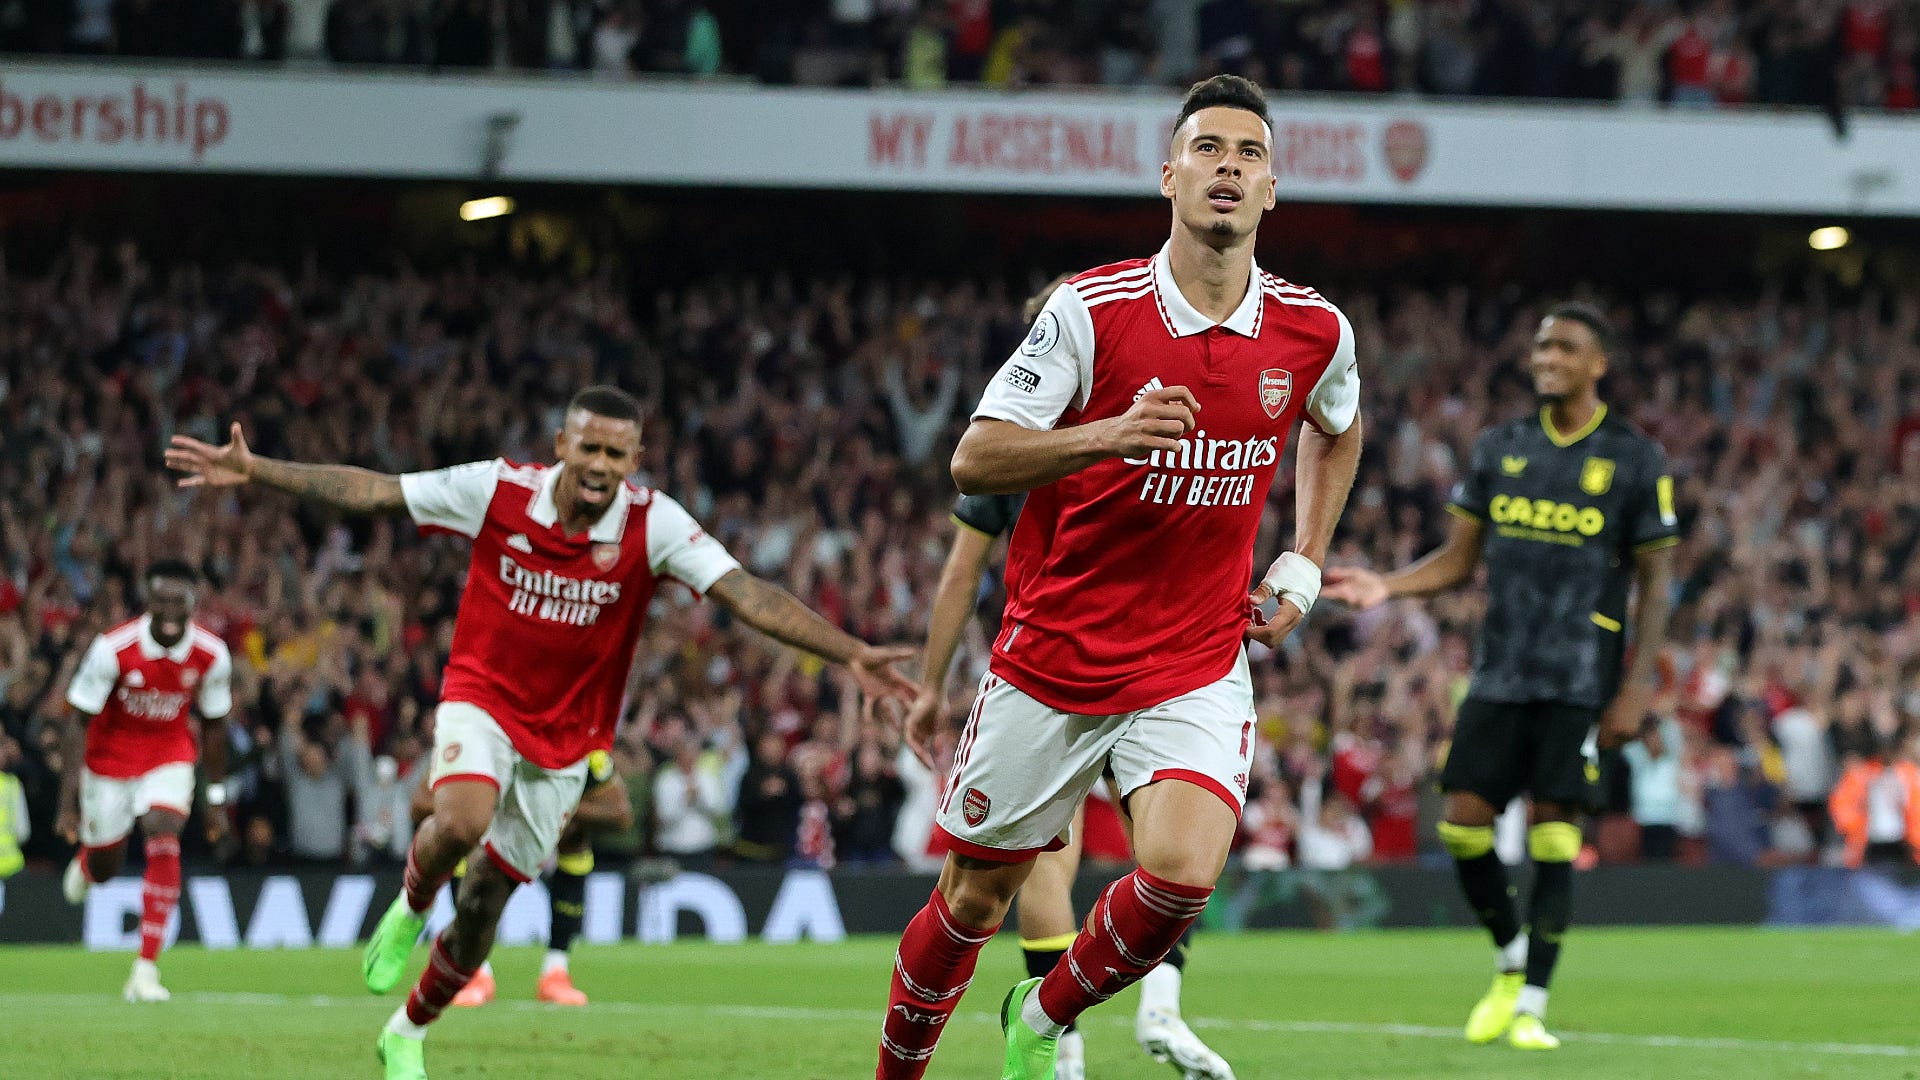 Brentford vs Arsenal Live stream, TV channel, kick-off time and where to watch Goal